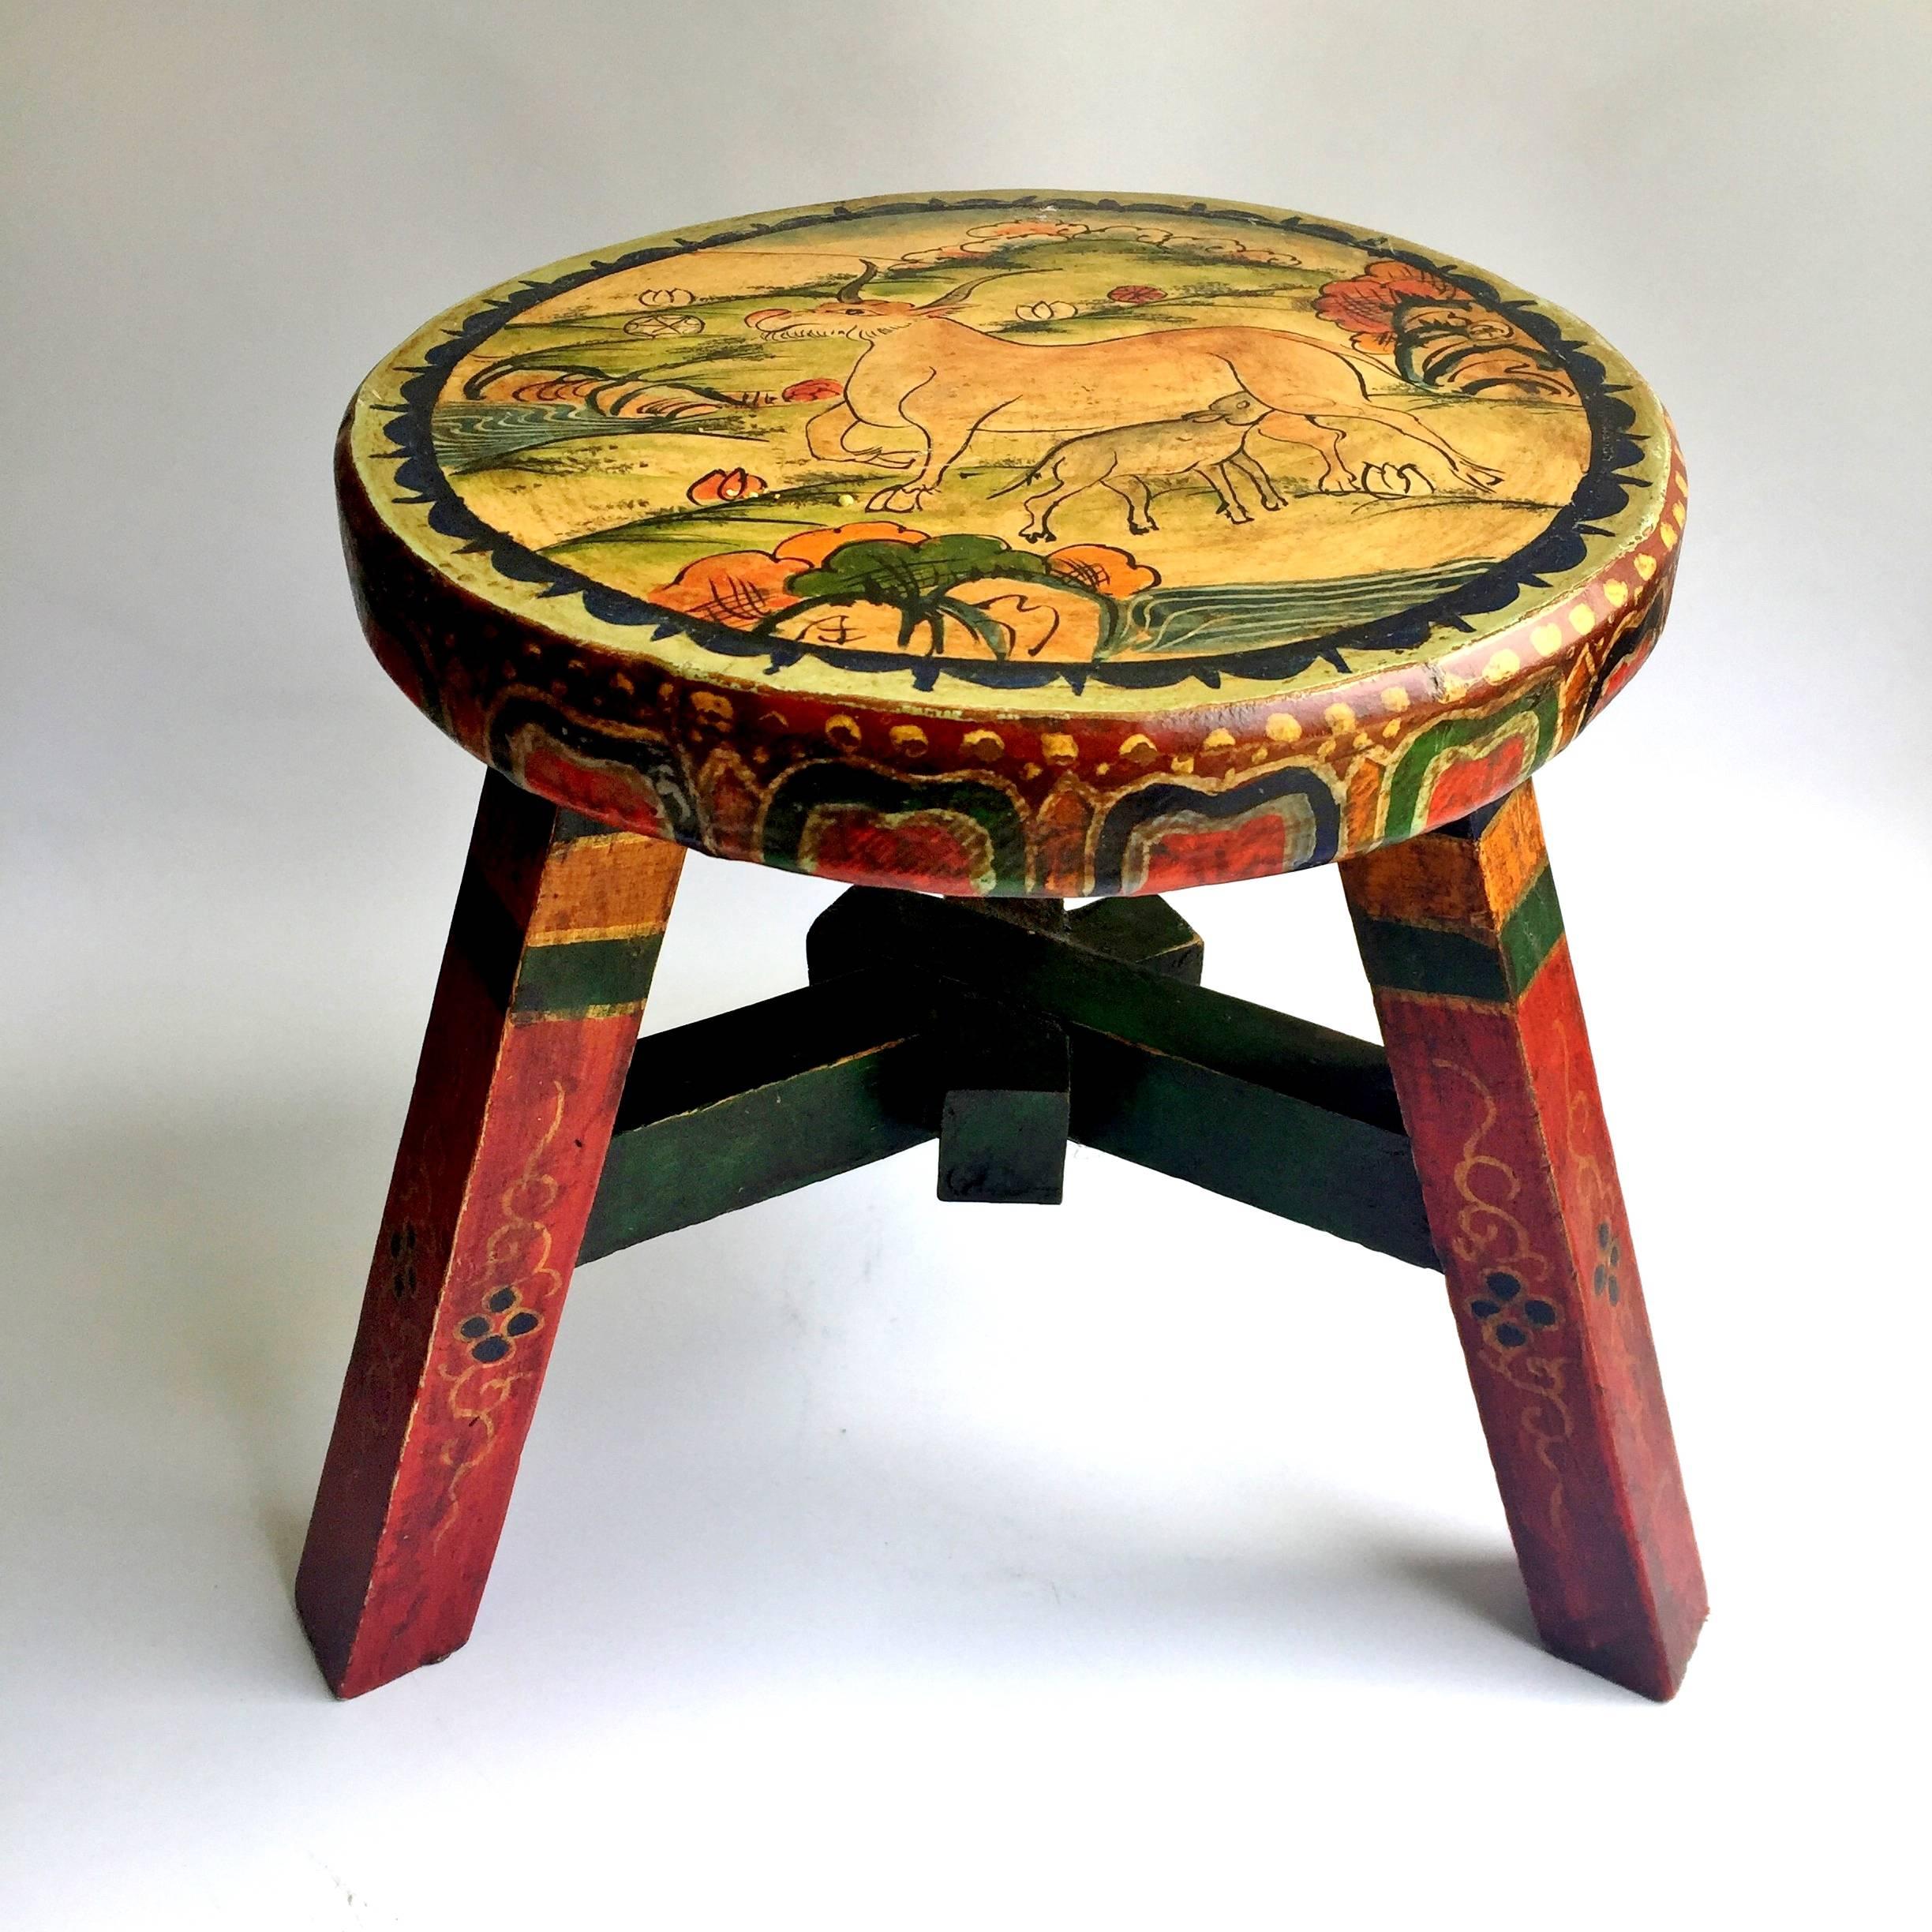 Contemporary Pair of Tibetan Stools, Hand-Painted